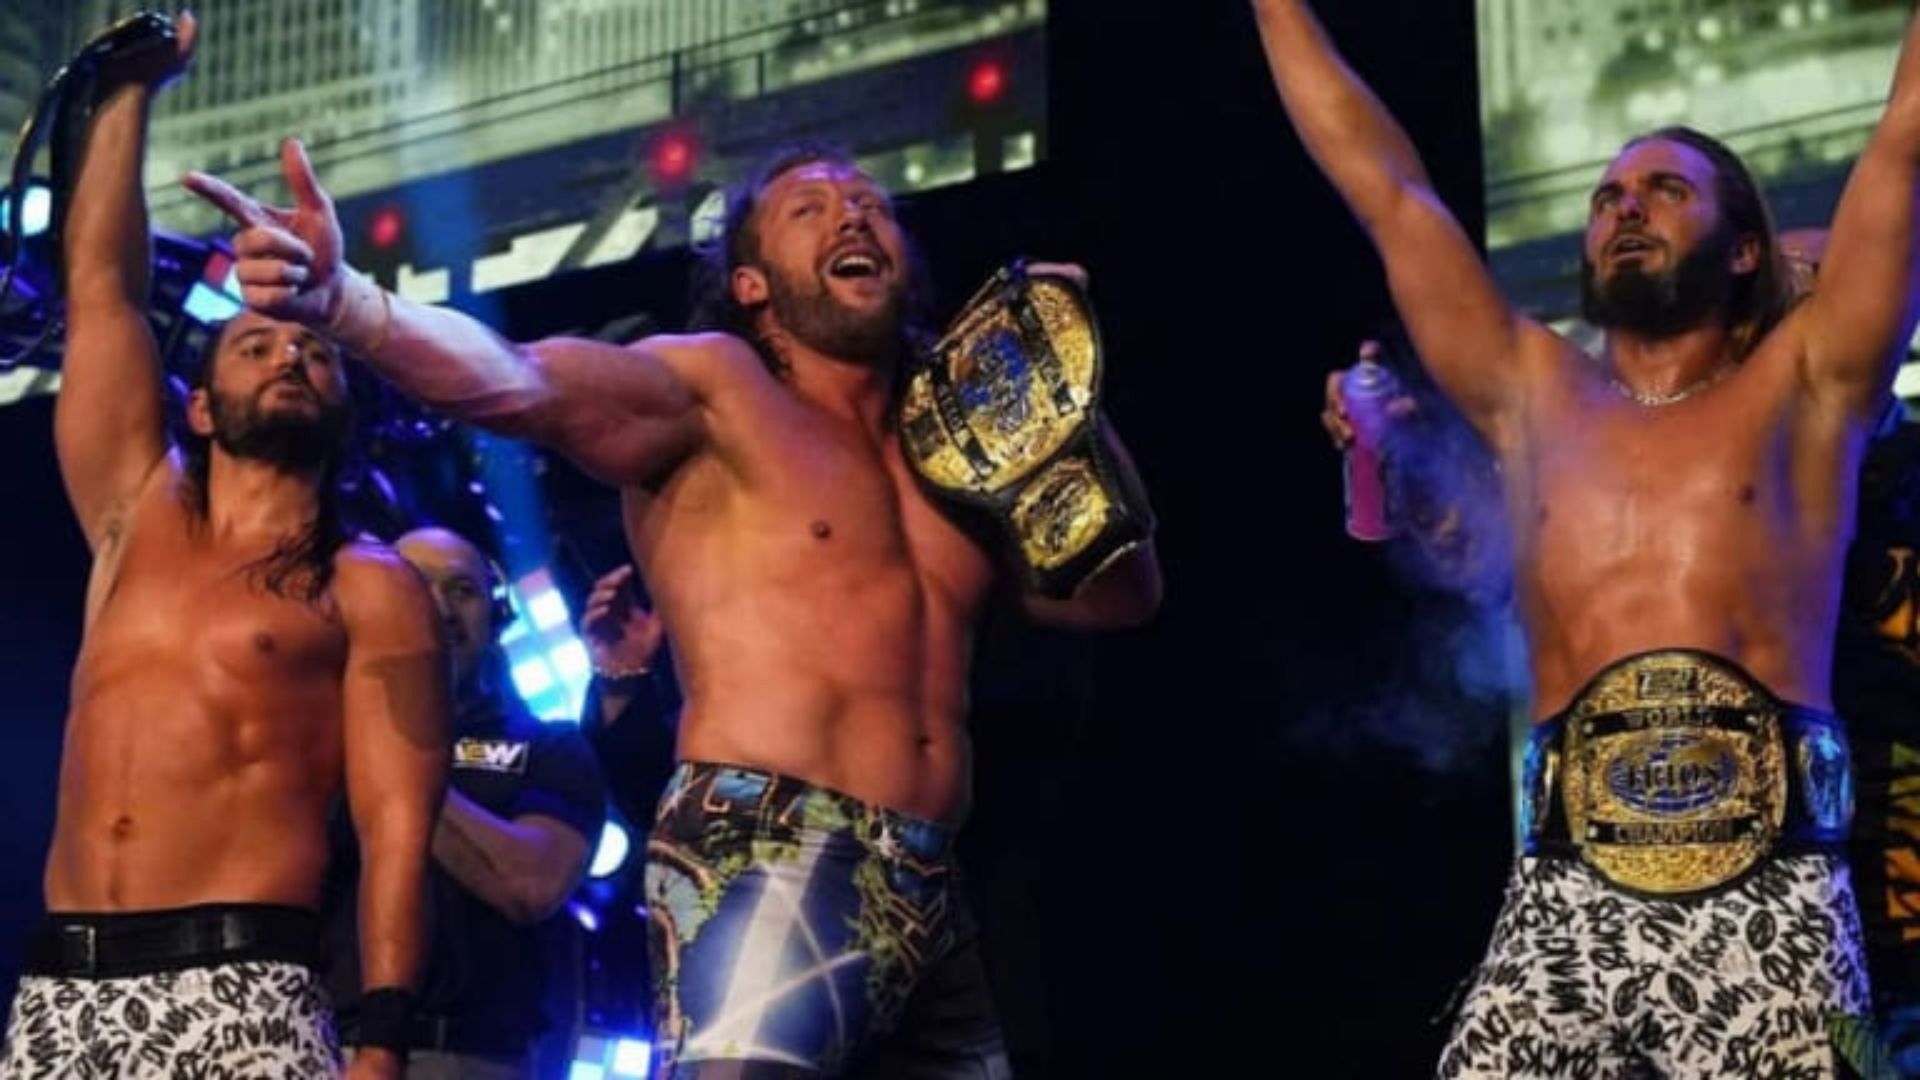 Kenny Omega and The Young Bucks will face Death Triangle on this week